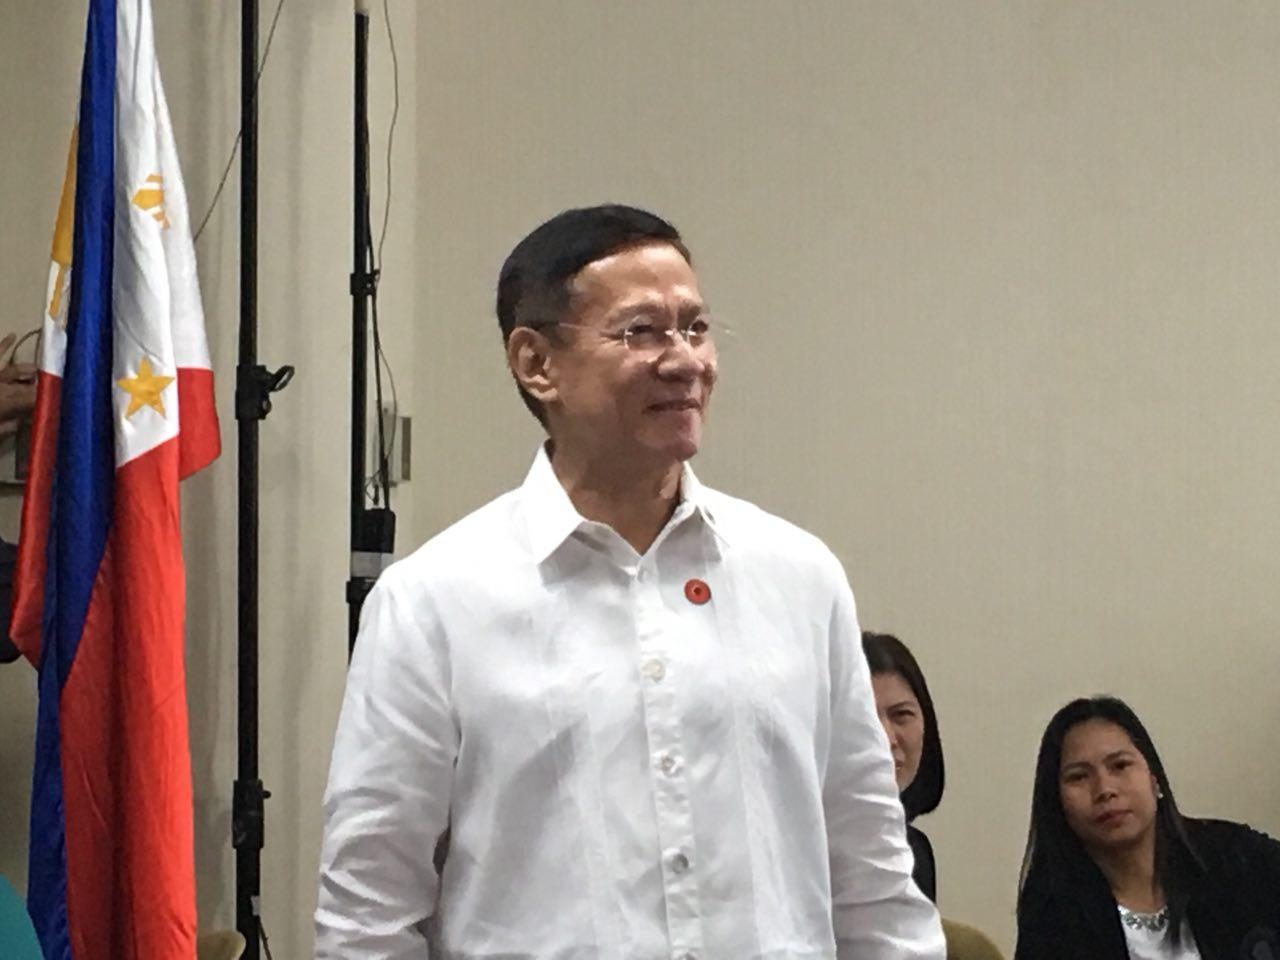 CA defers confirmation of DOH chief Duque over Dengvaxia issue